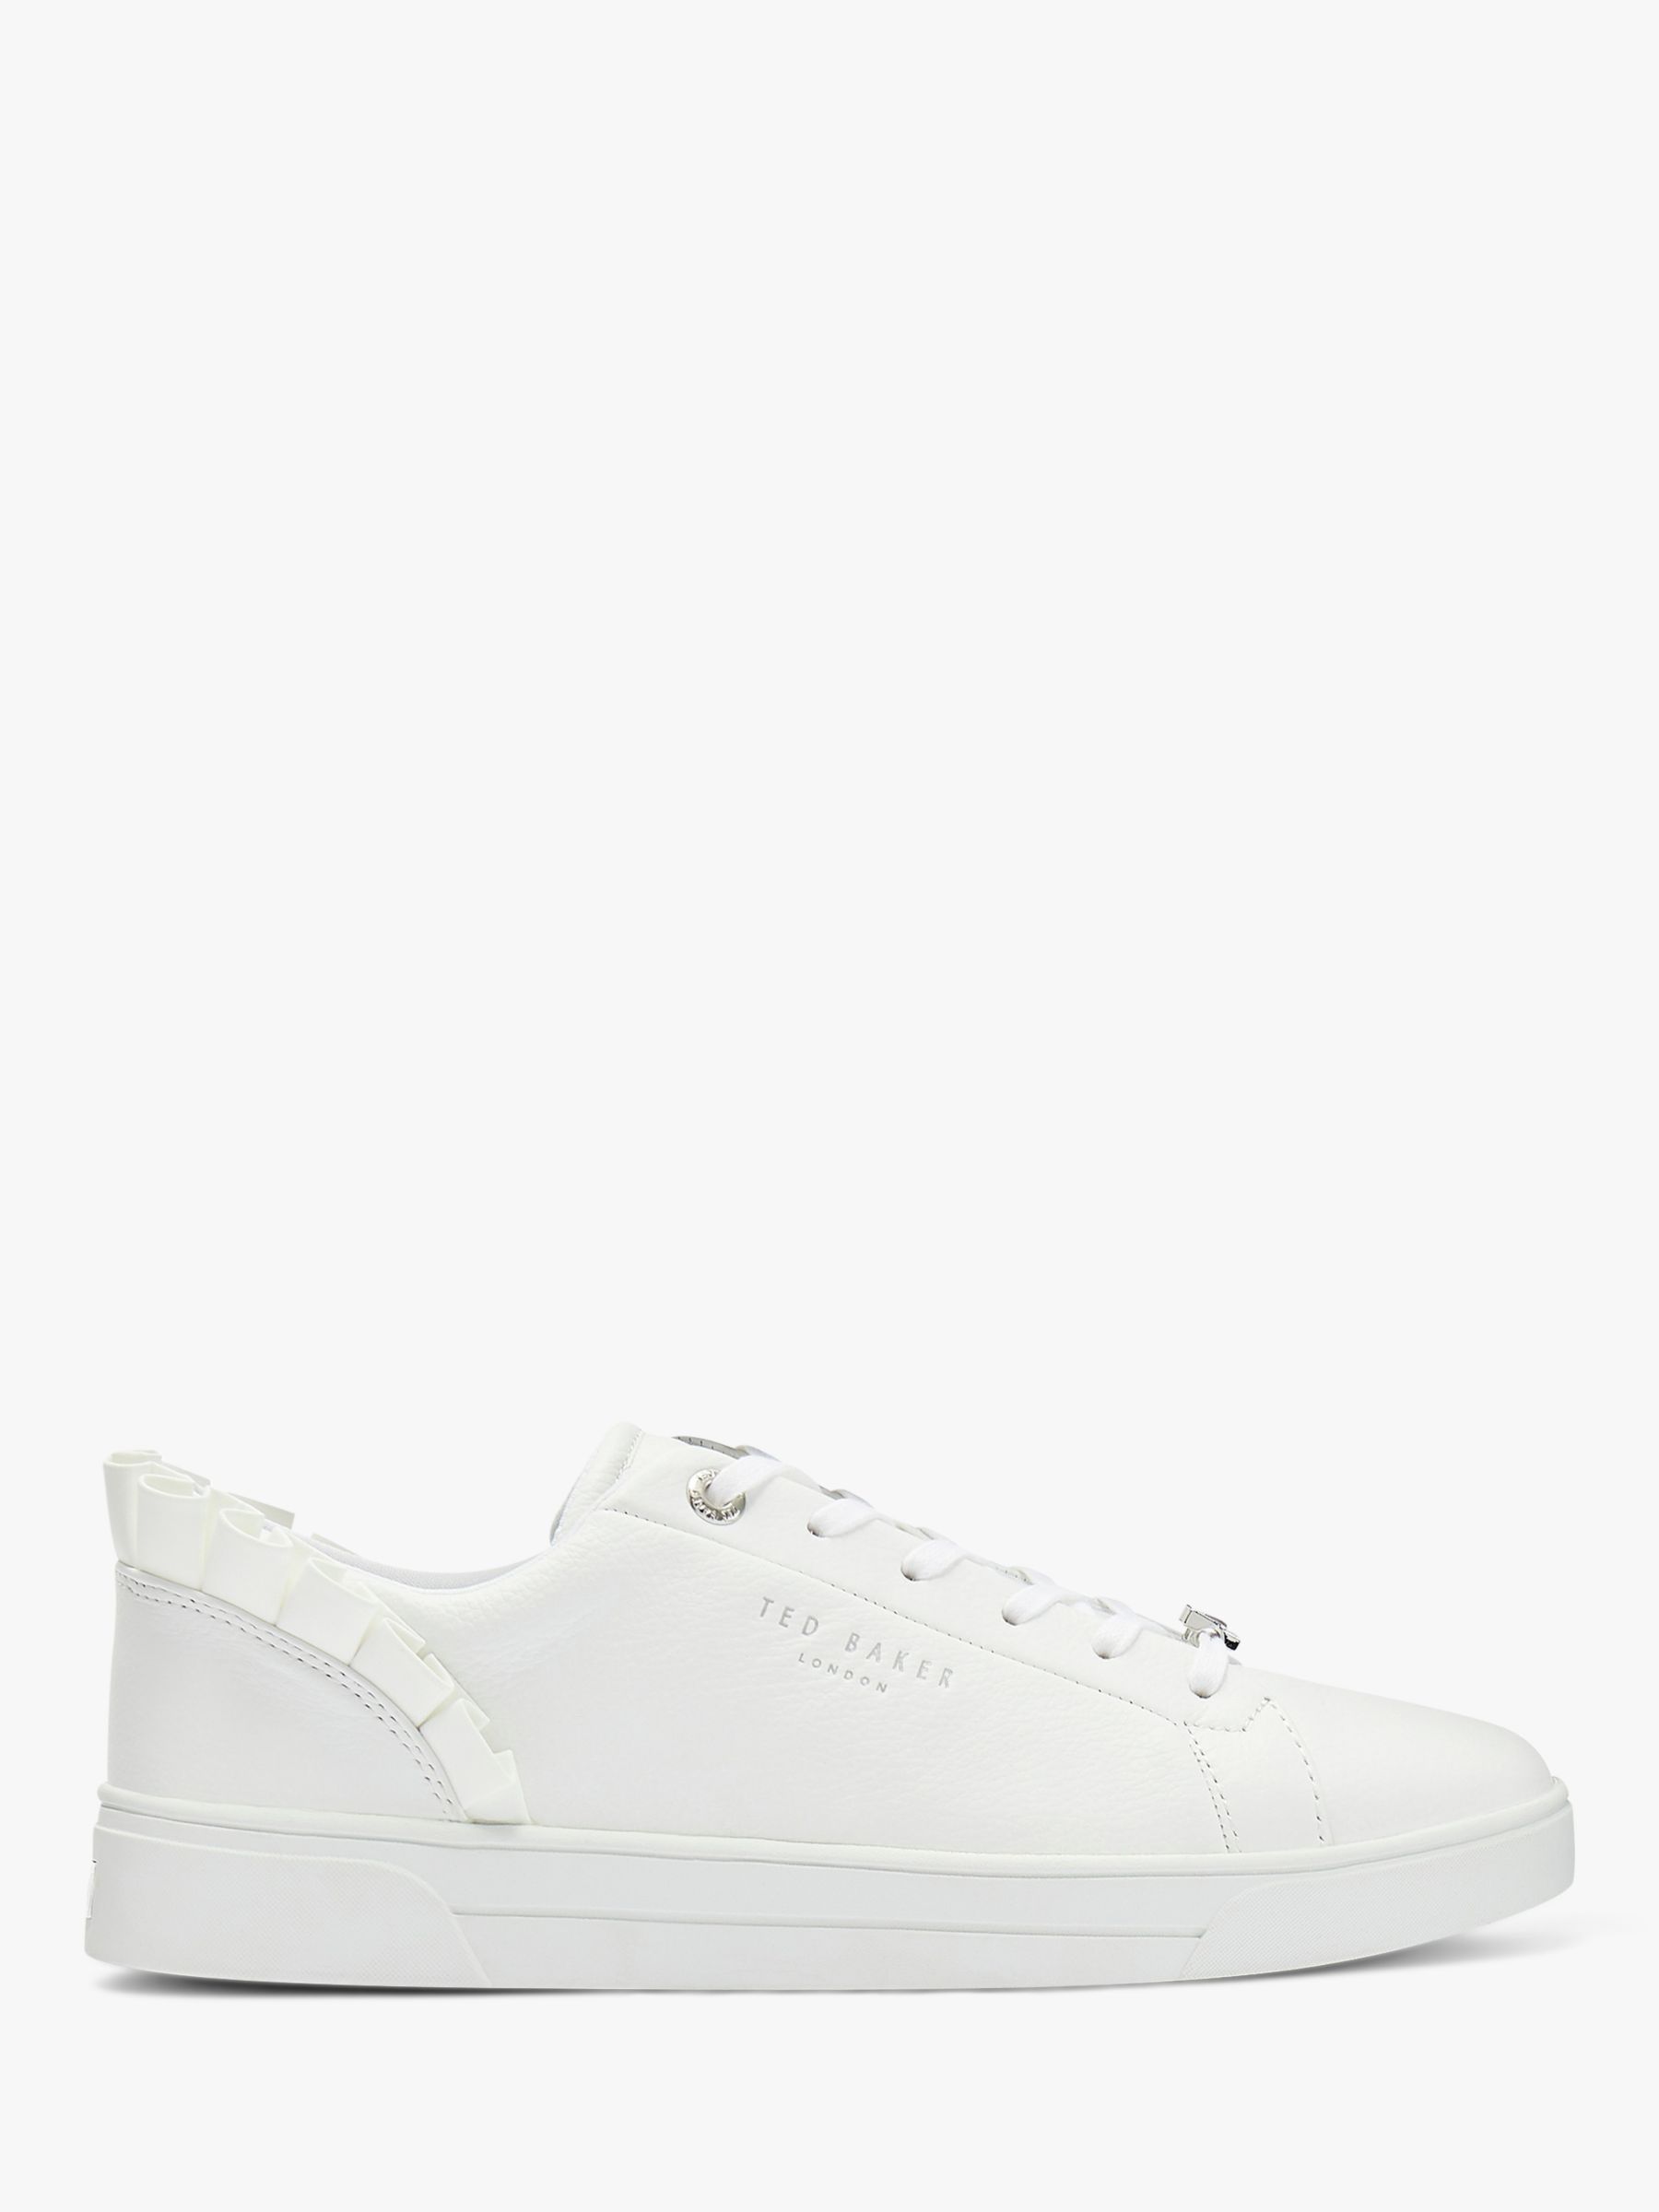 ted baker trainers